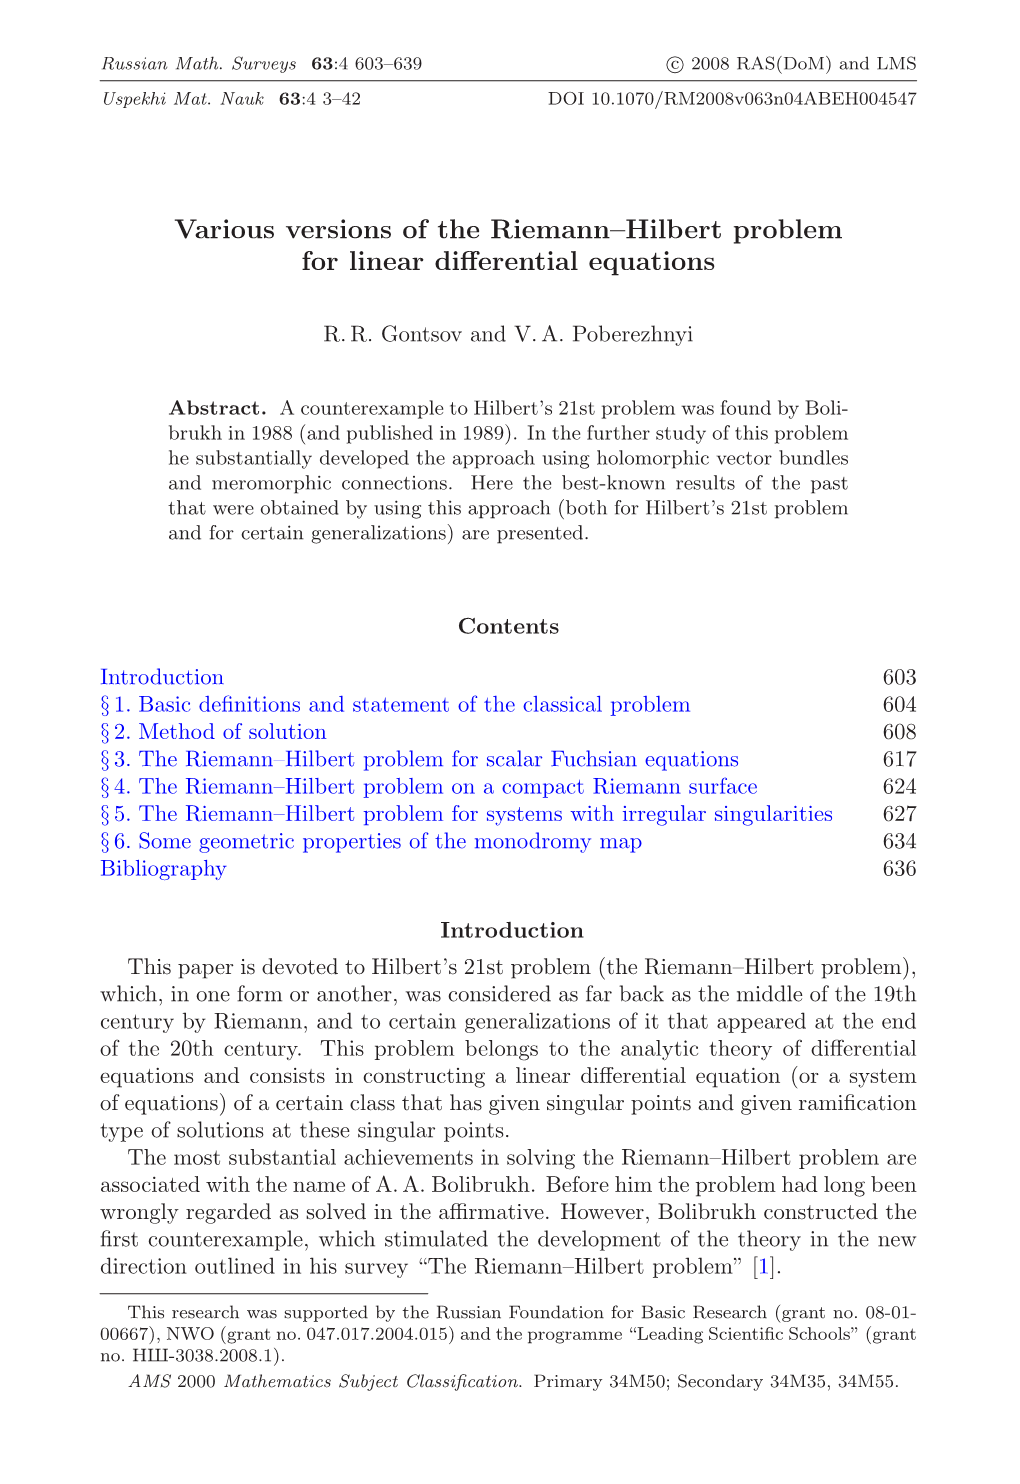 Various Versions of the Riemann--Hilbert Problem for Linear Differential Equations